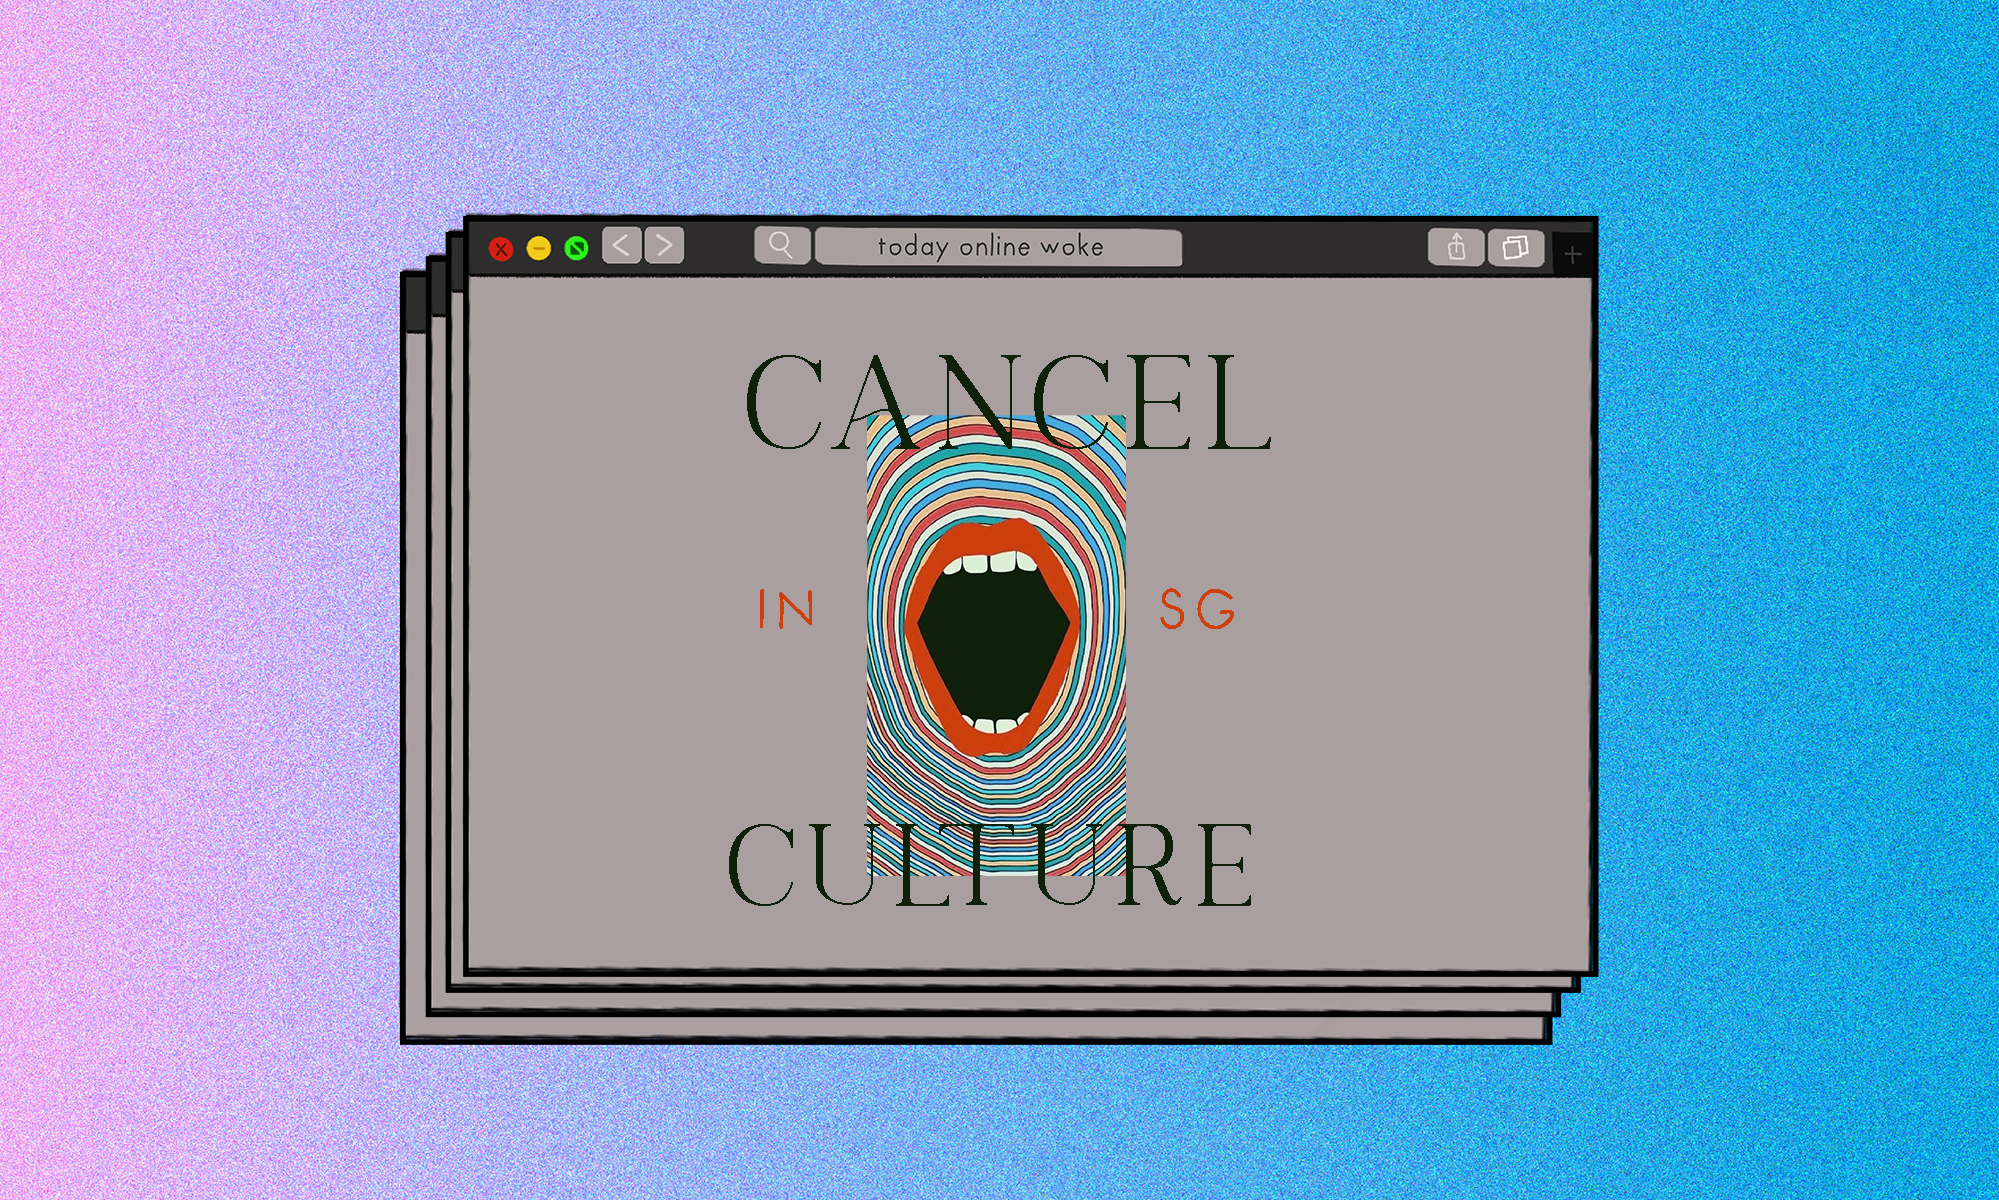 On “Cancel Culture” and Being “Woke” in Singapore